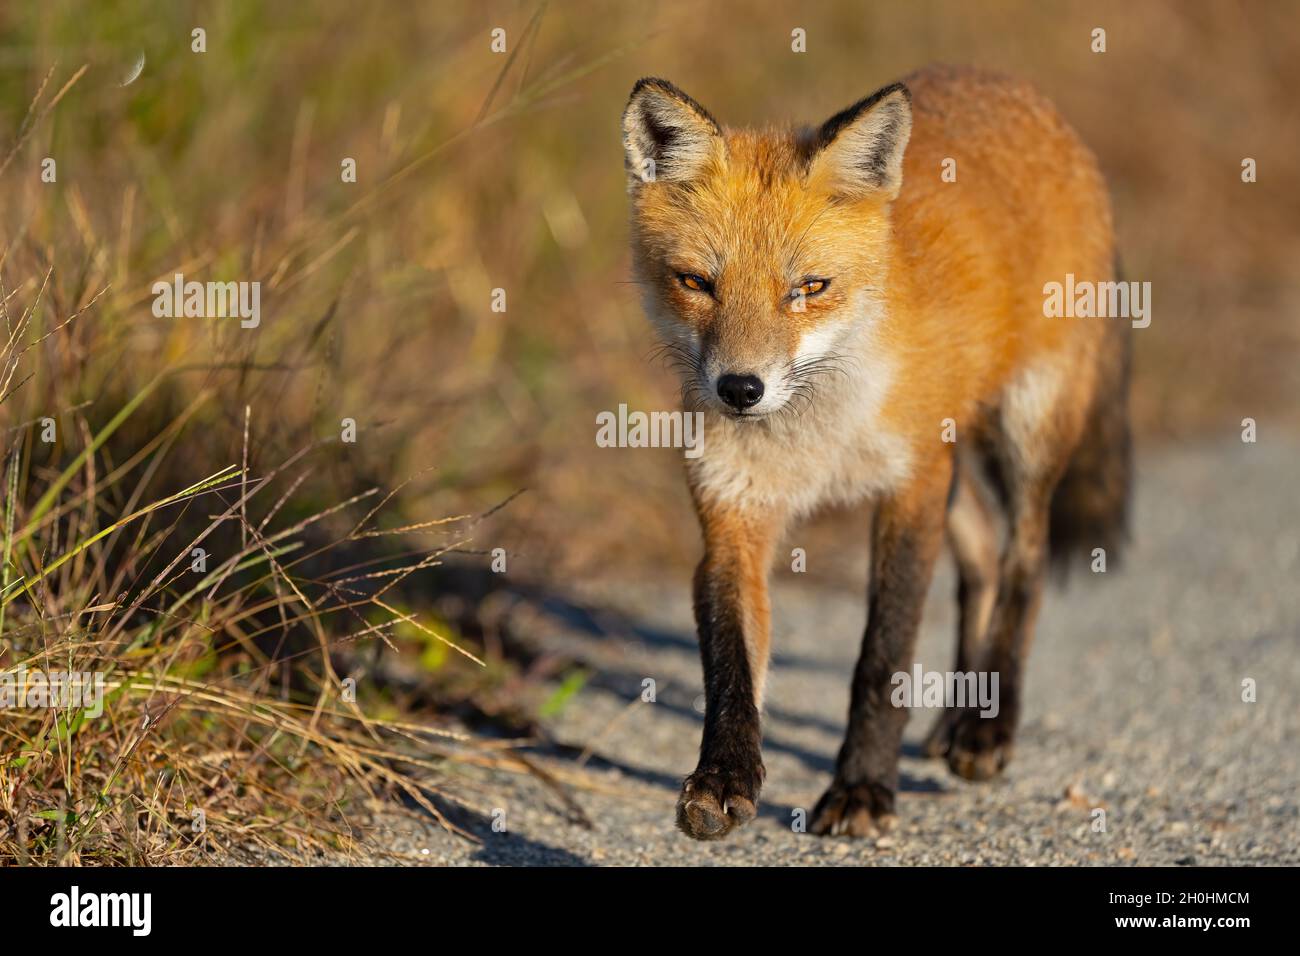 Red Fox Walking Down a Dirt Road Stock Photo